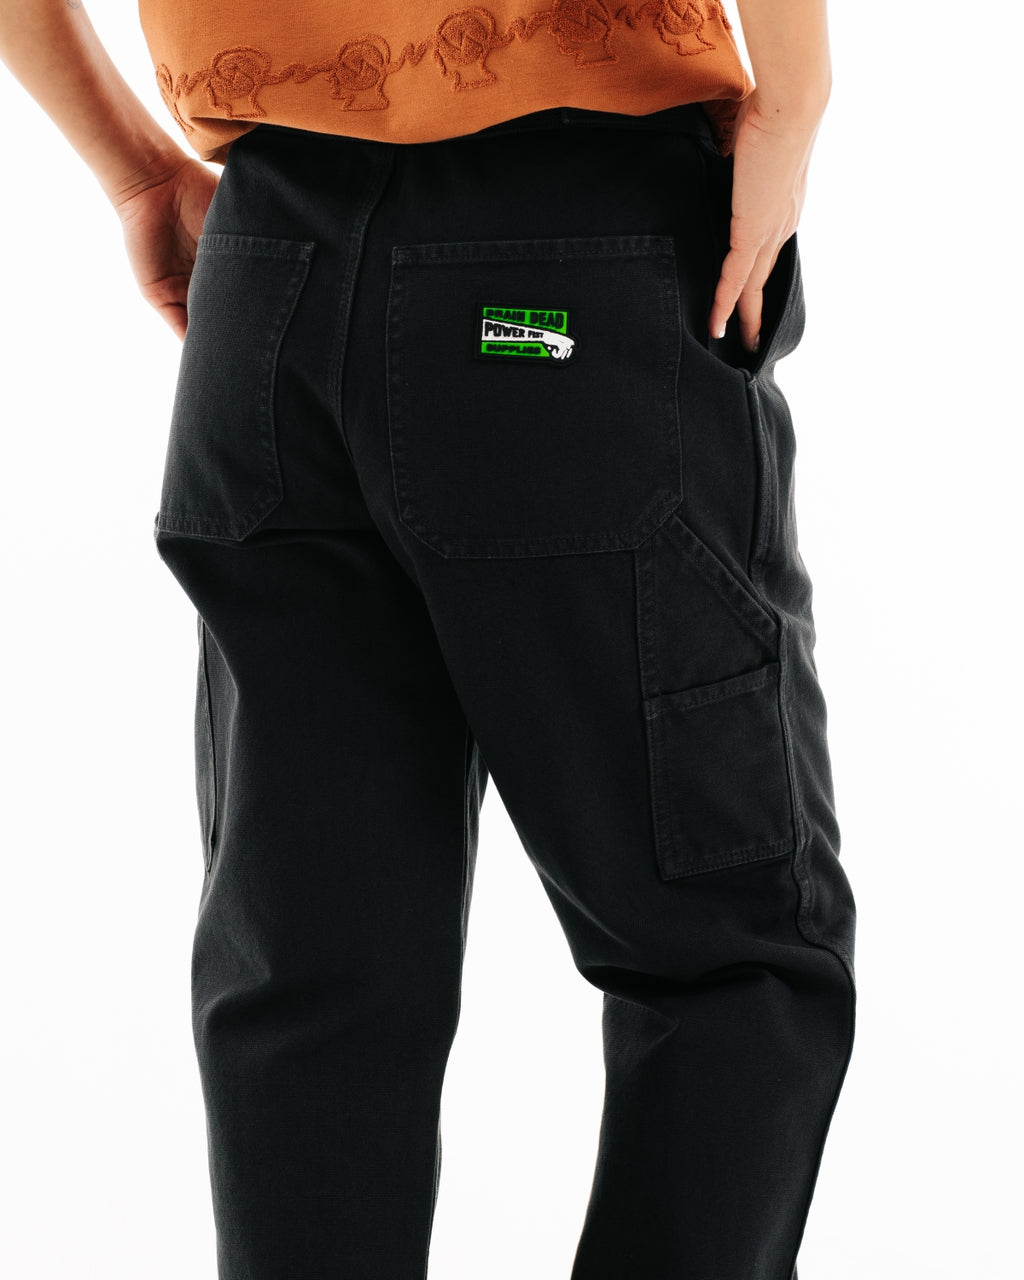 Relaxed Fit Carpenter Pants - Black – ban.do